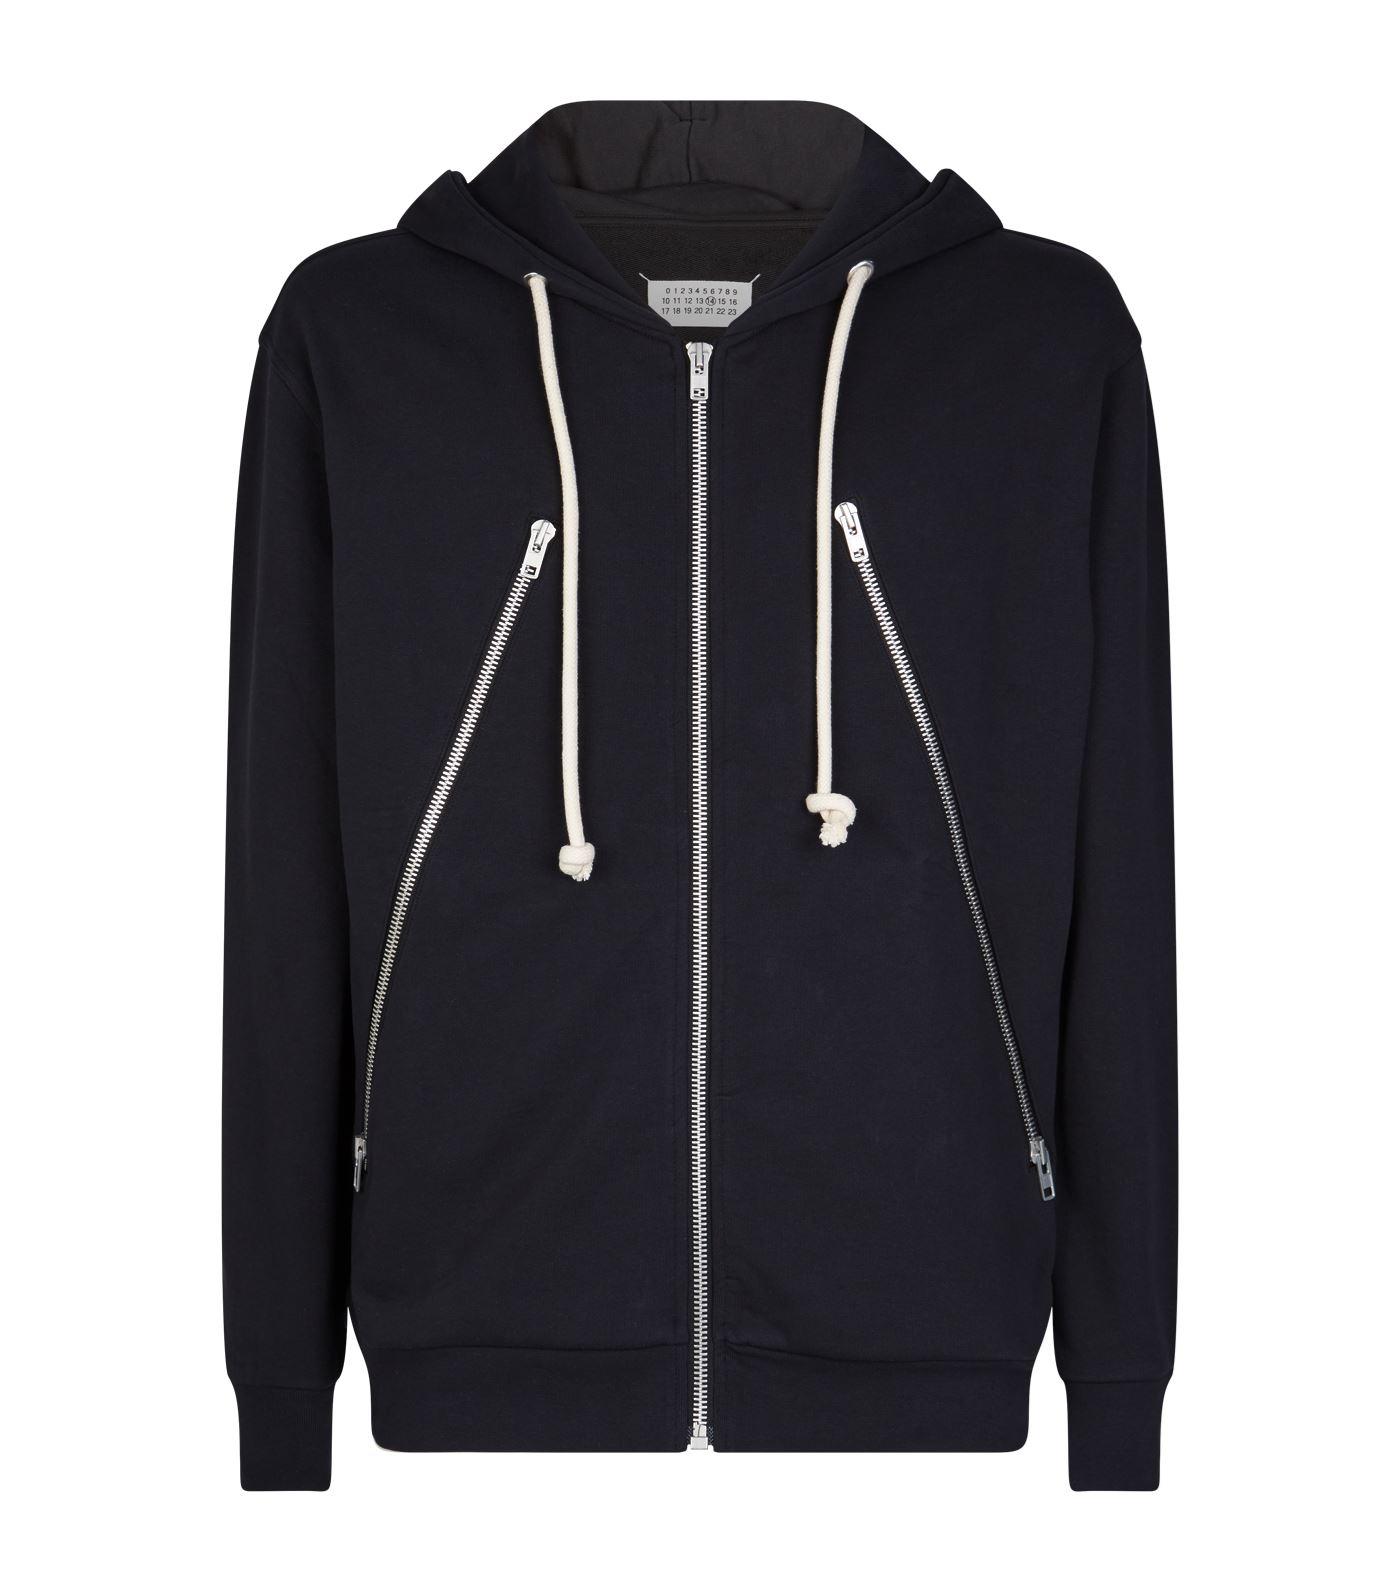 Maison Margiela Zipped Hoodie in Black for Men - Save 66% - Lyst